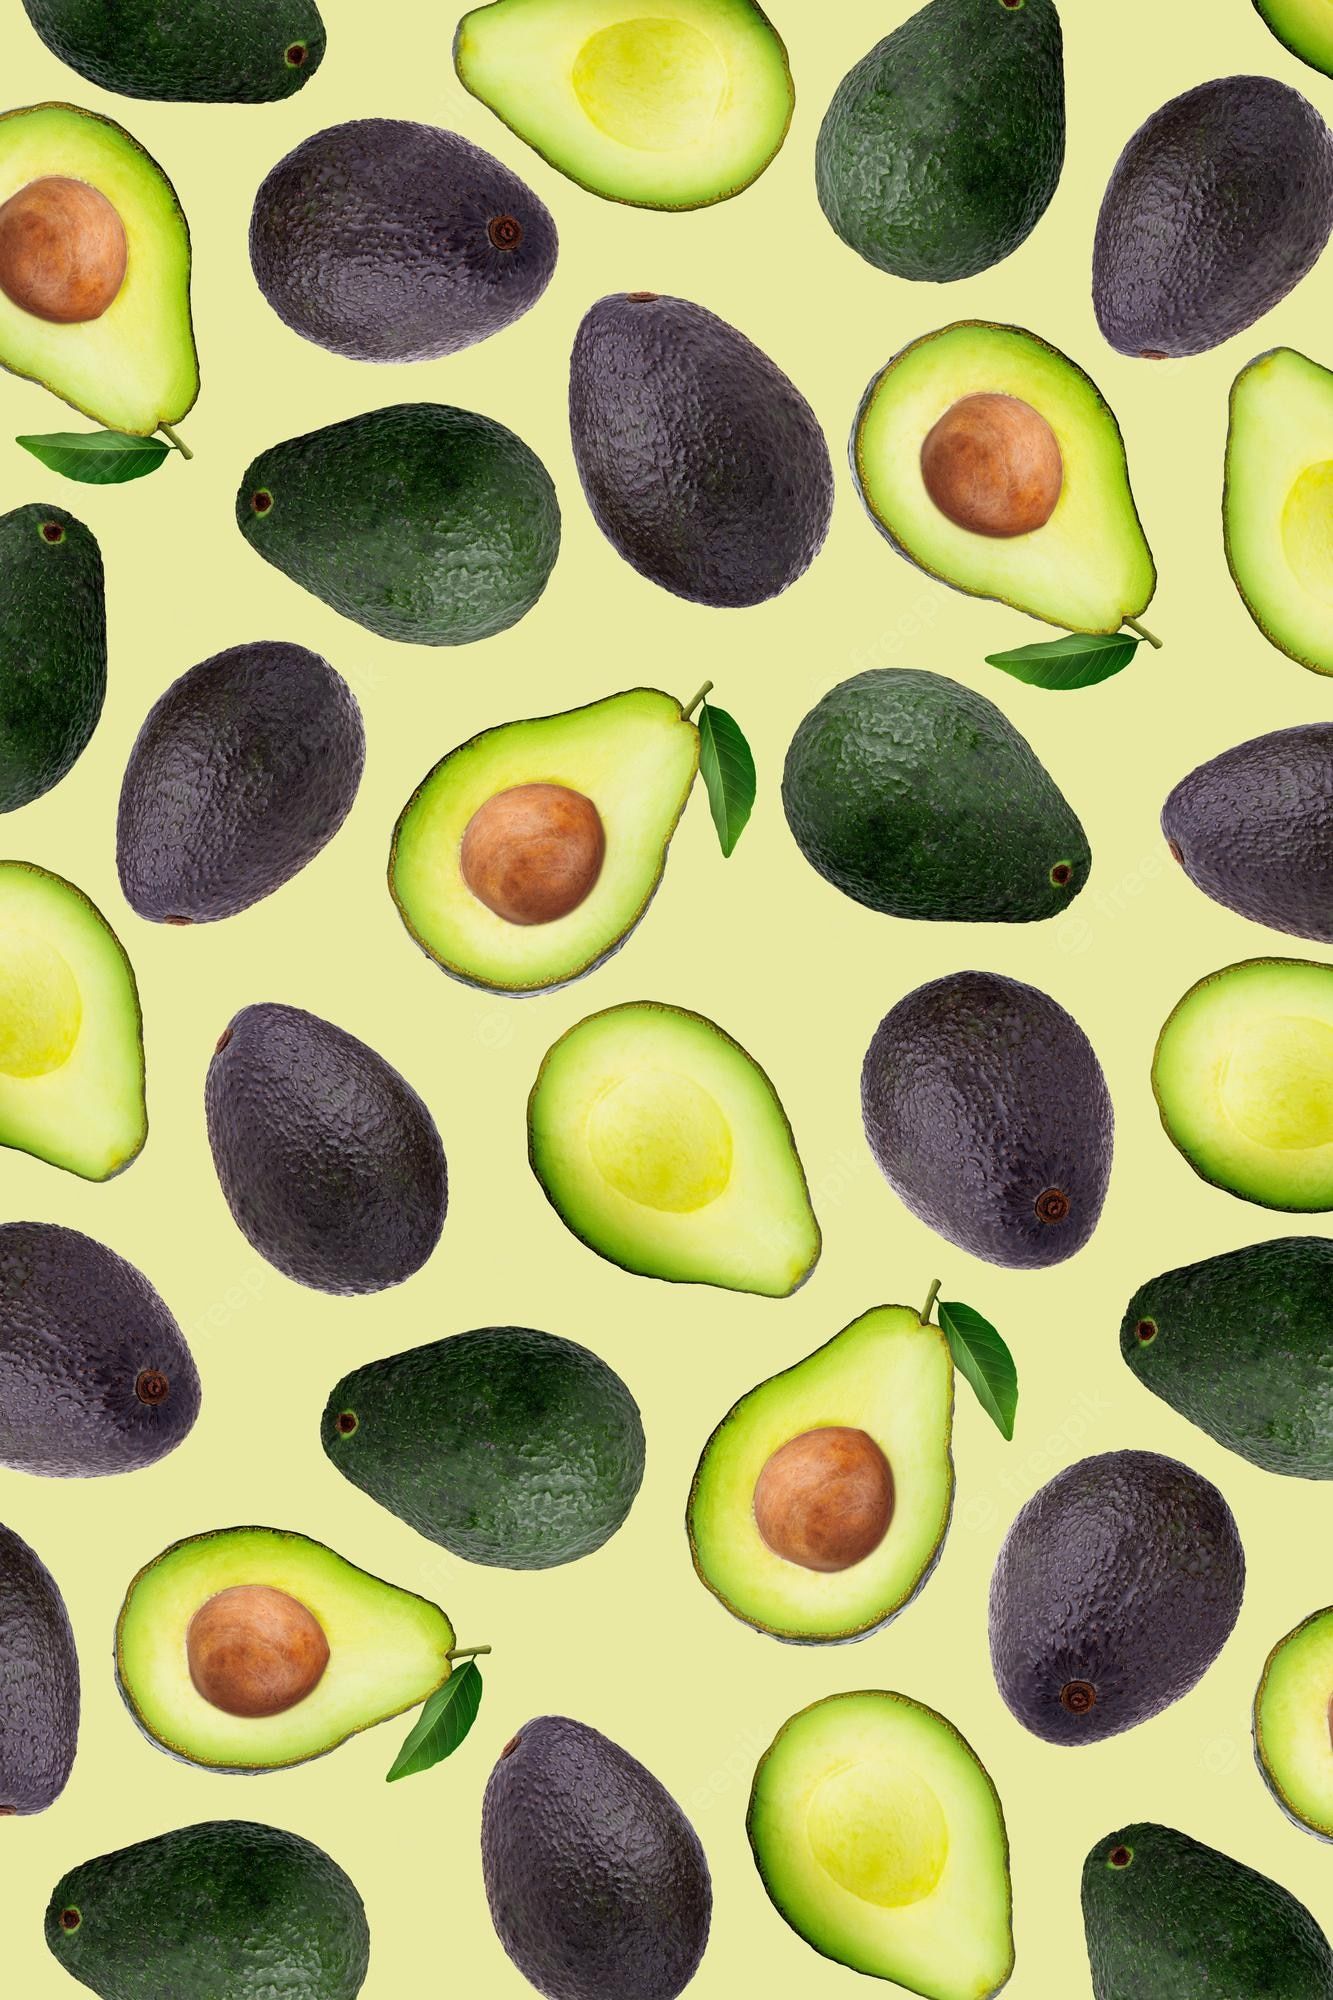 A pattern of avocados on yellow background - Avocado